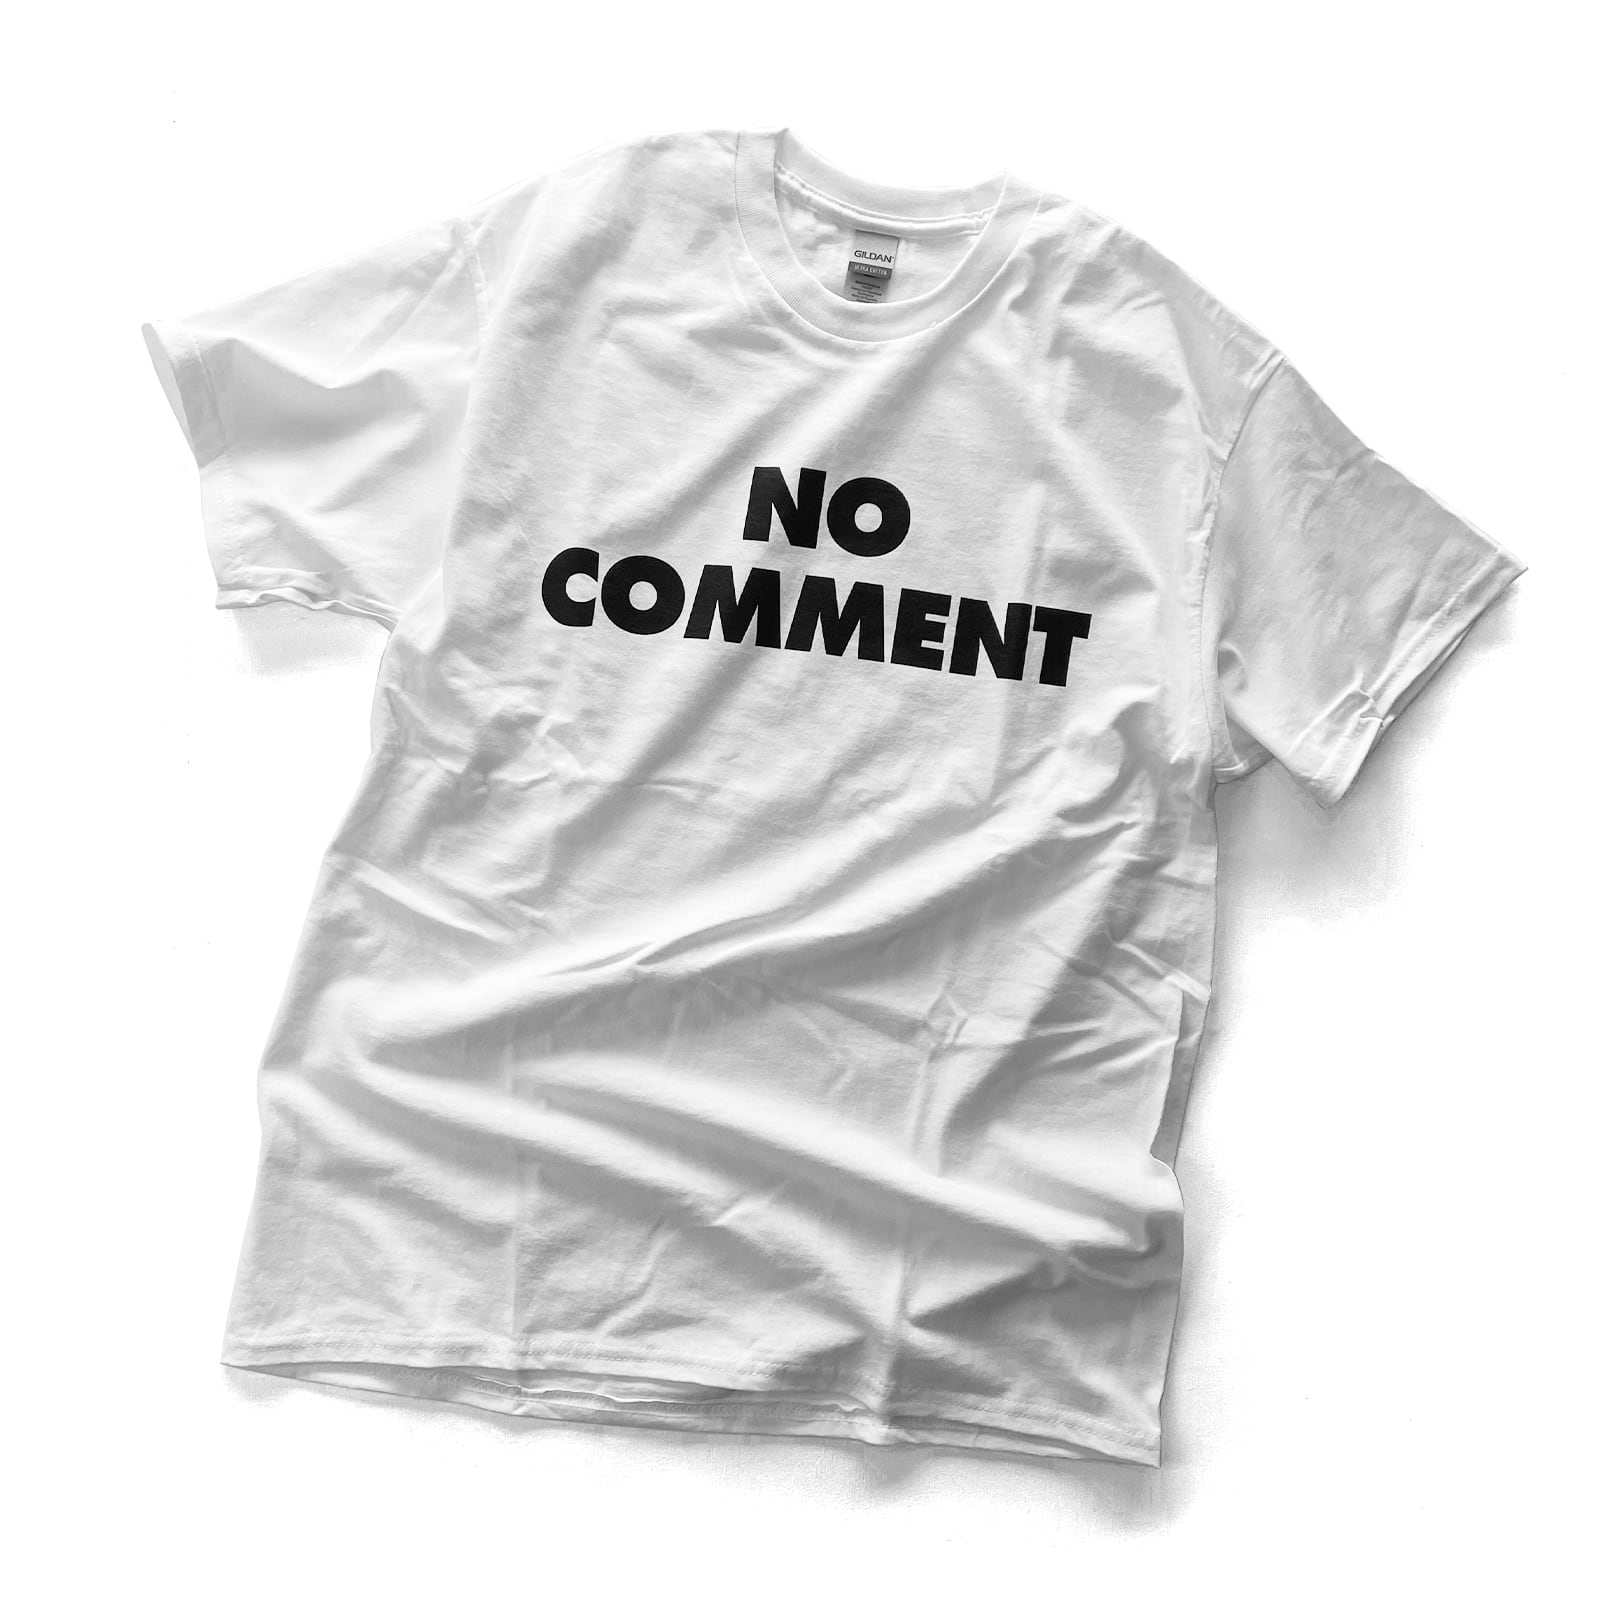 SUB POP 「NO COMMENT 」 オルタナ　ロック　グランジ　バンド Tシャツ 　2000-subpop-nc |  oguoy/Destroy it Create it Share it powered by BASE